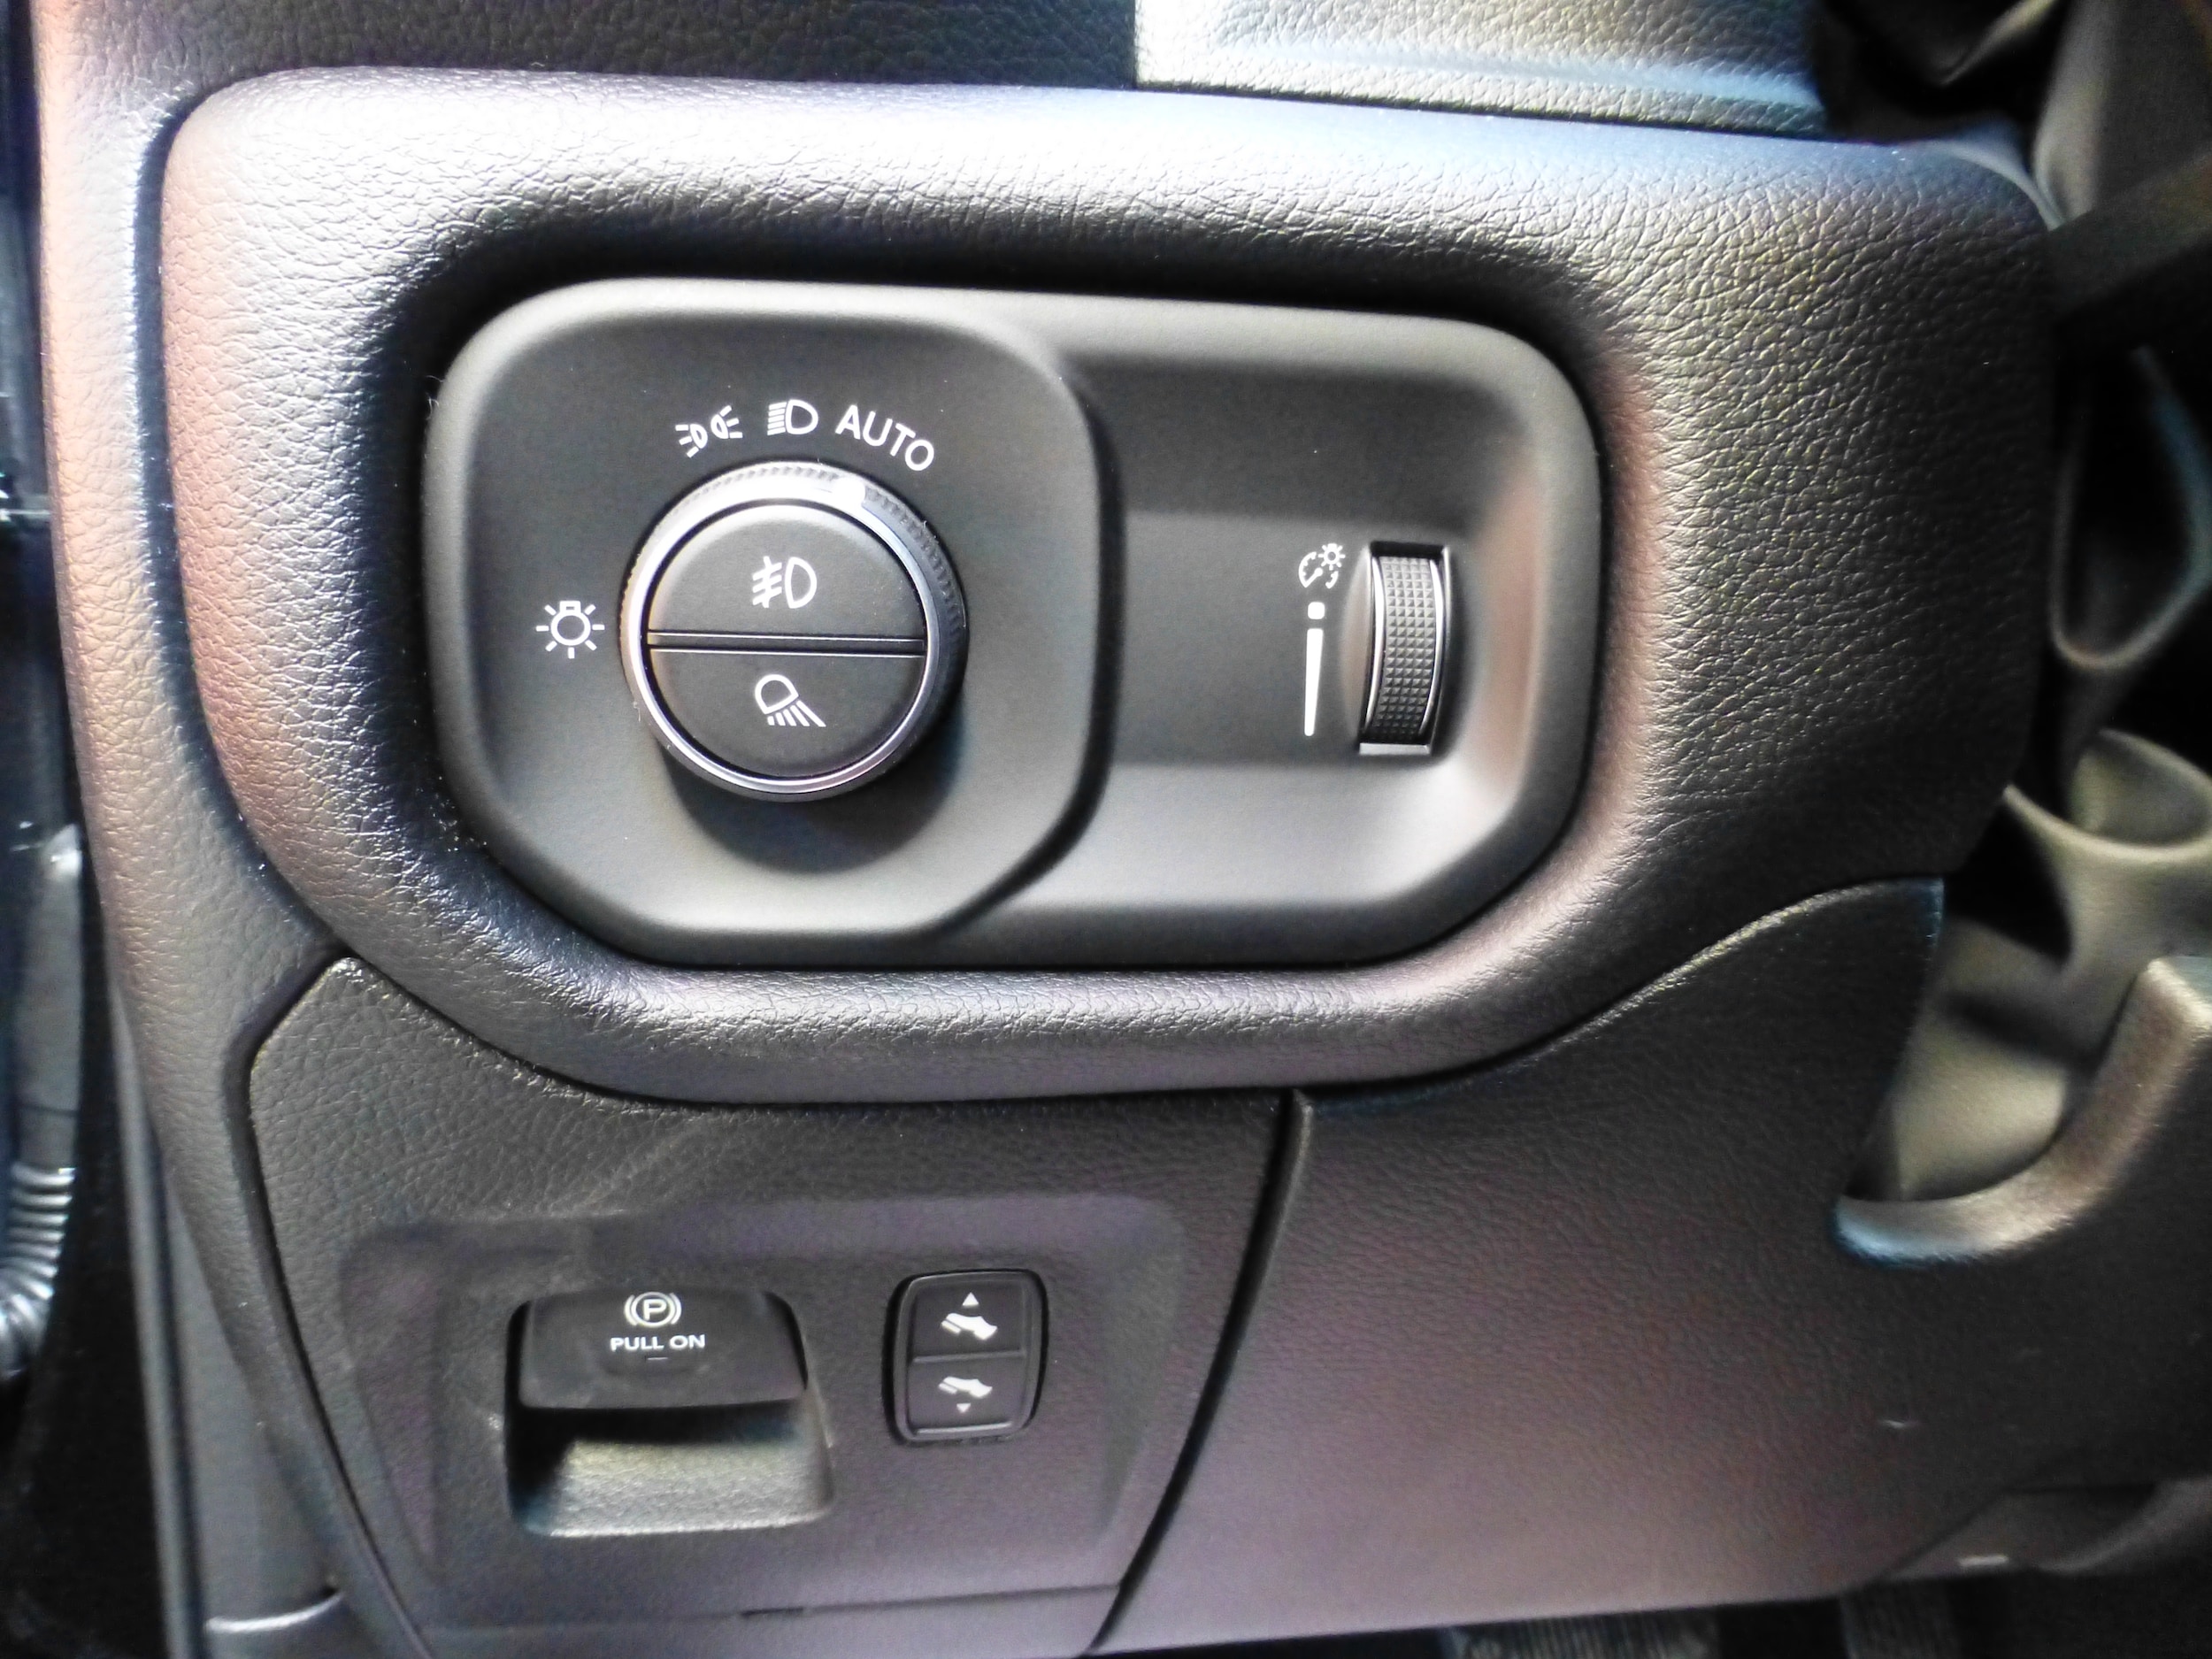 New 2022 Ram 1500 Rebel 12 Inch Display With Nav For Sale Springbrook On